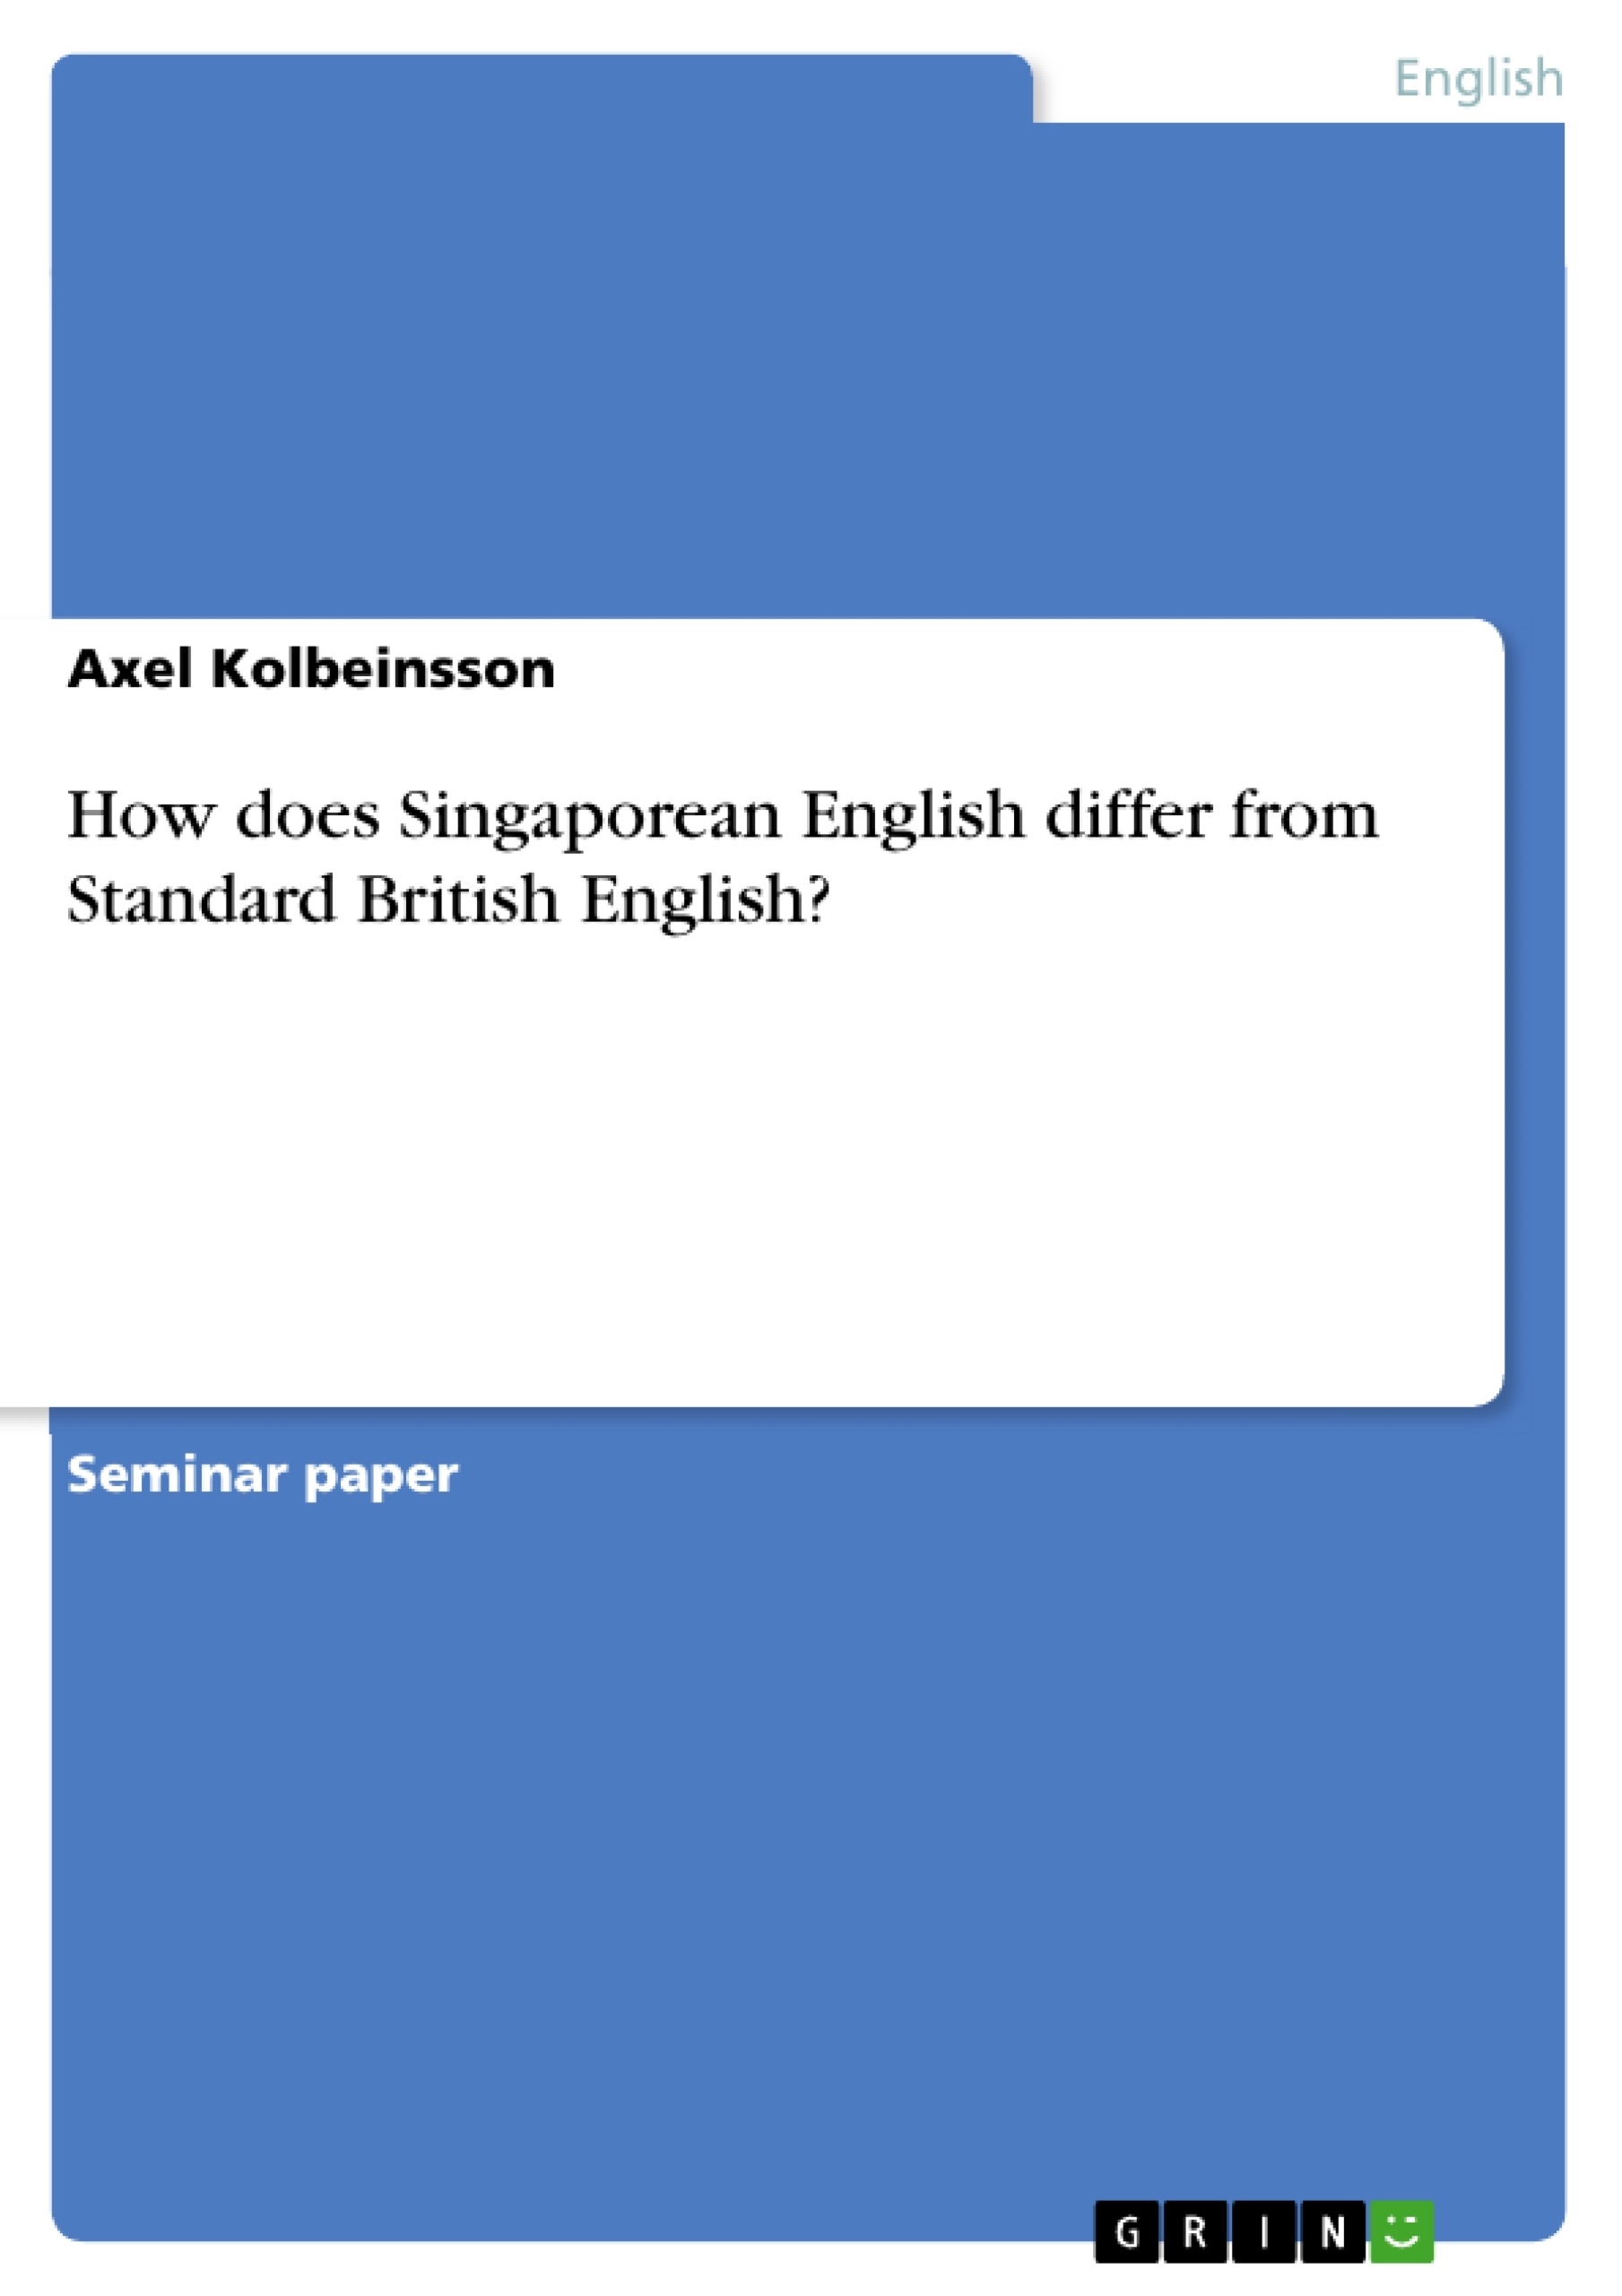 Title: How does Singaporean English differ from Standard British English?